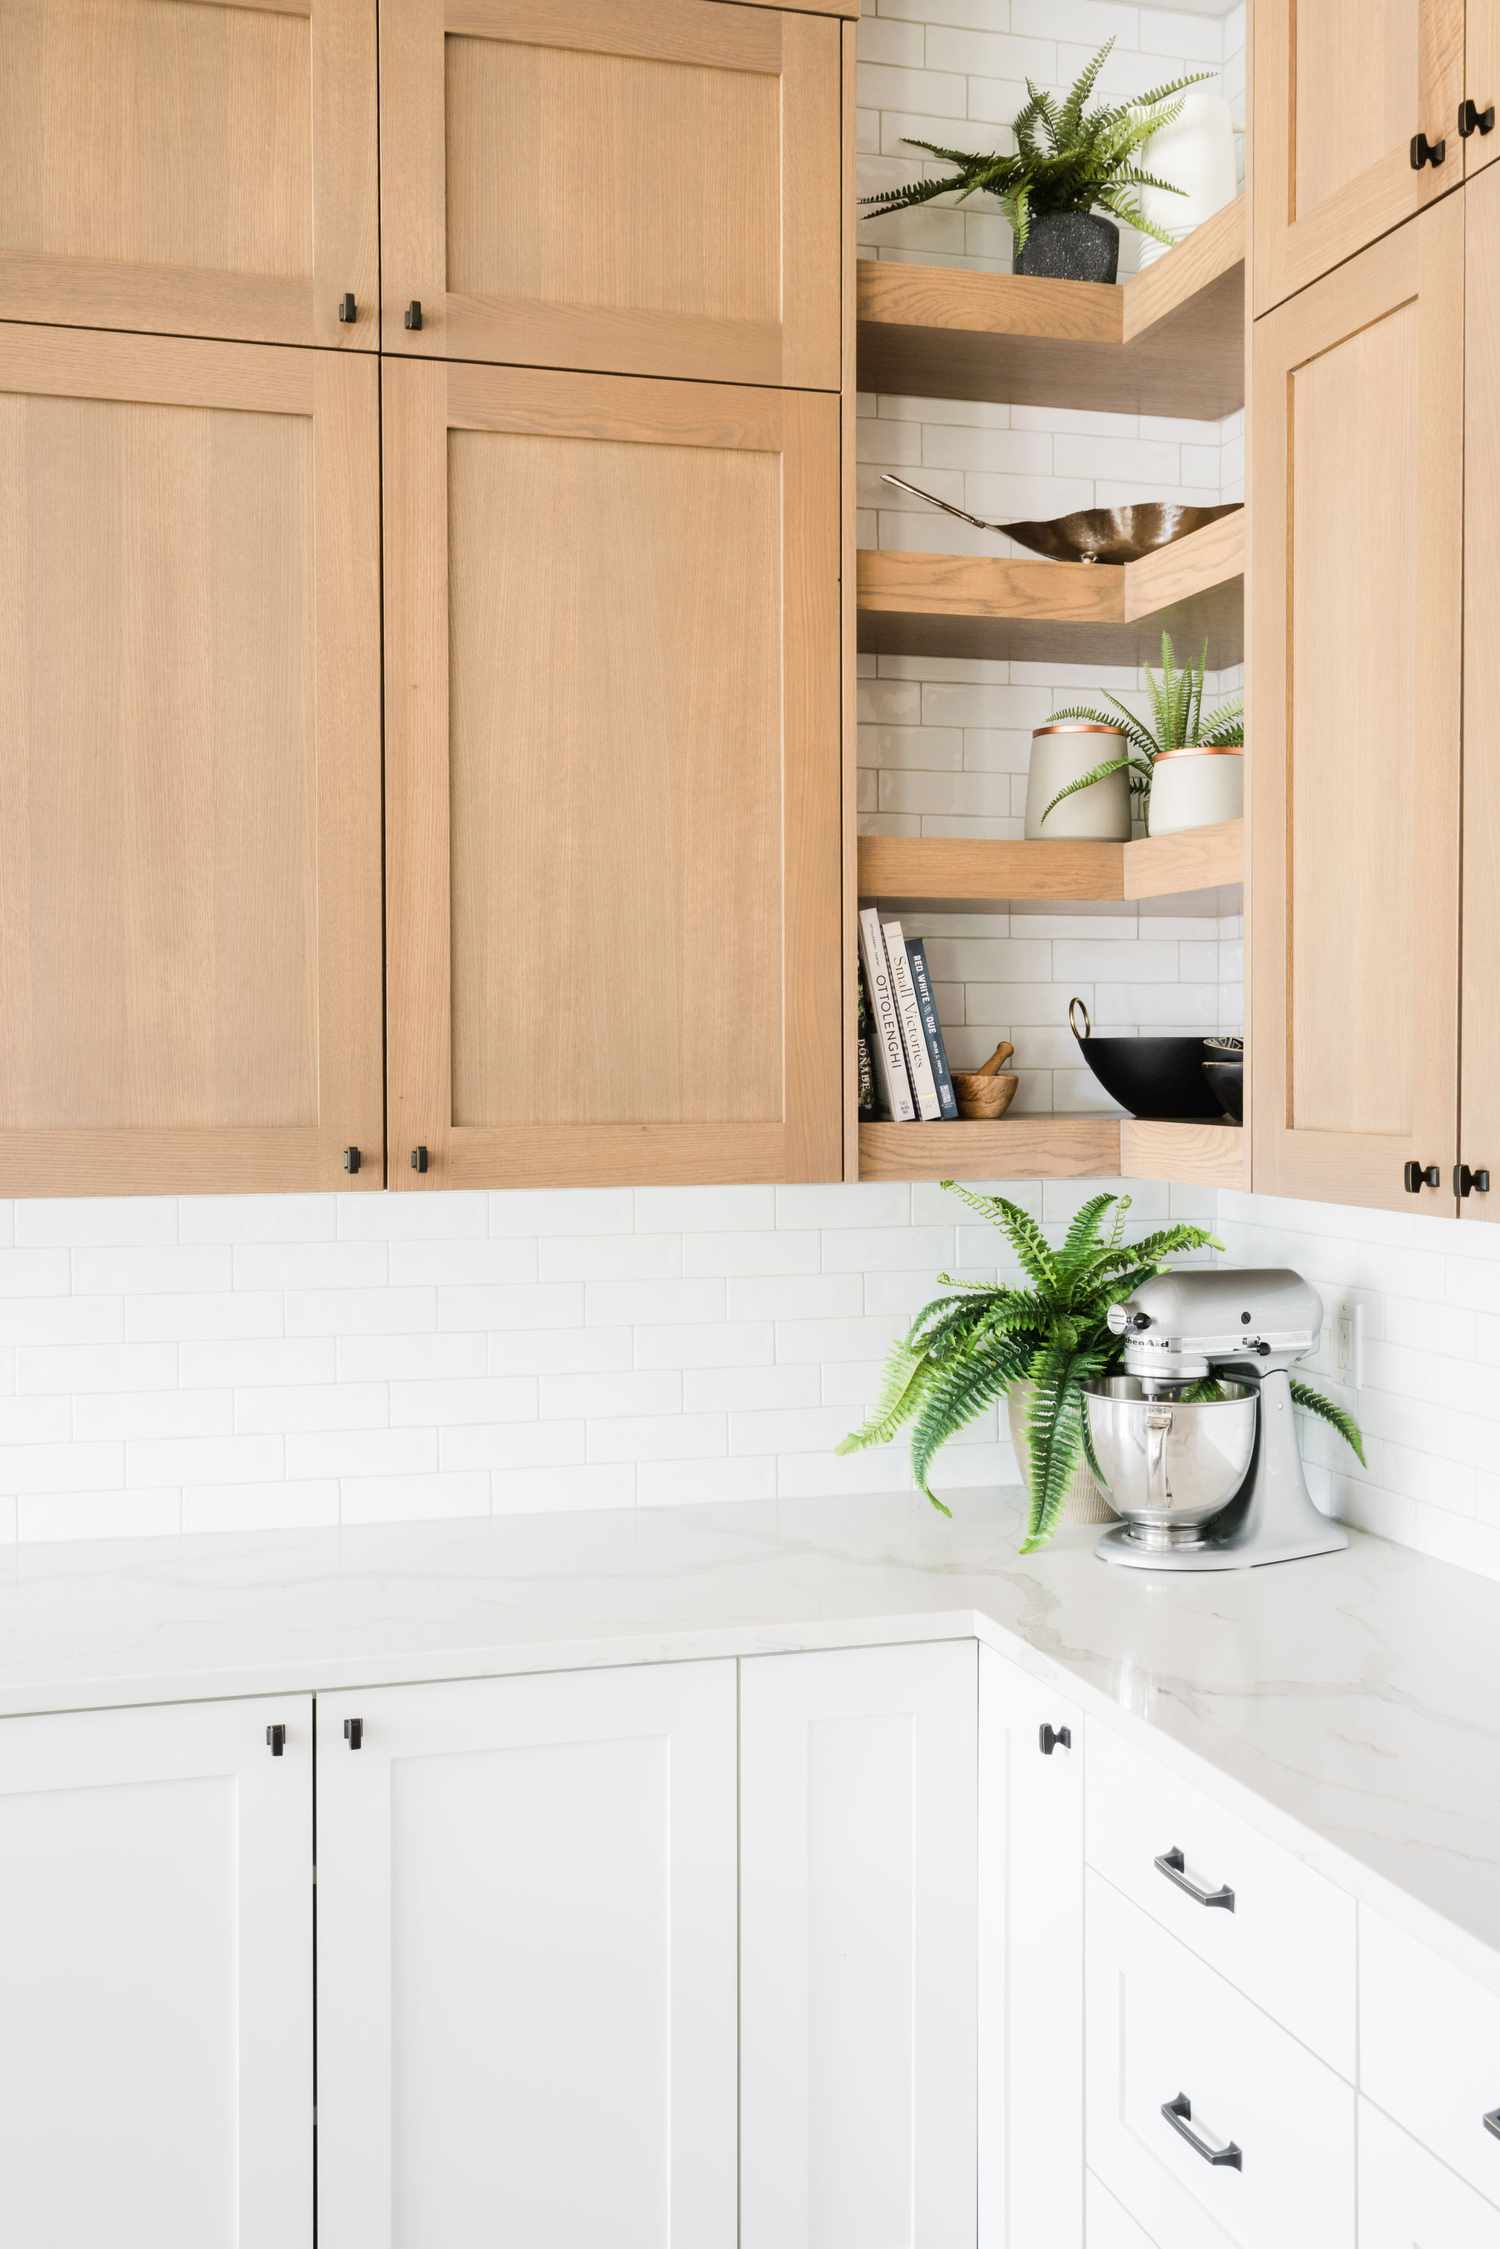 Corner Cabinet Or Shelf For Your Space, Kitchen With Shelves In Corner